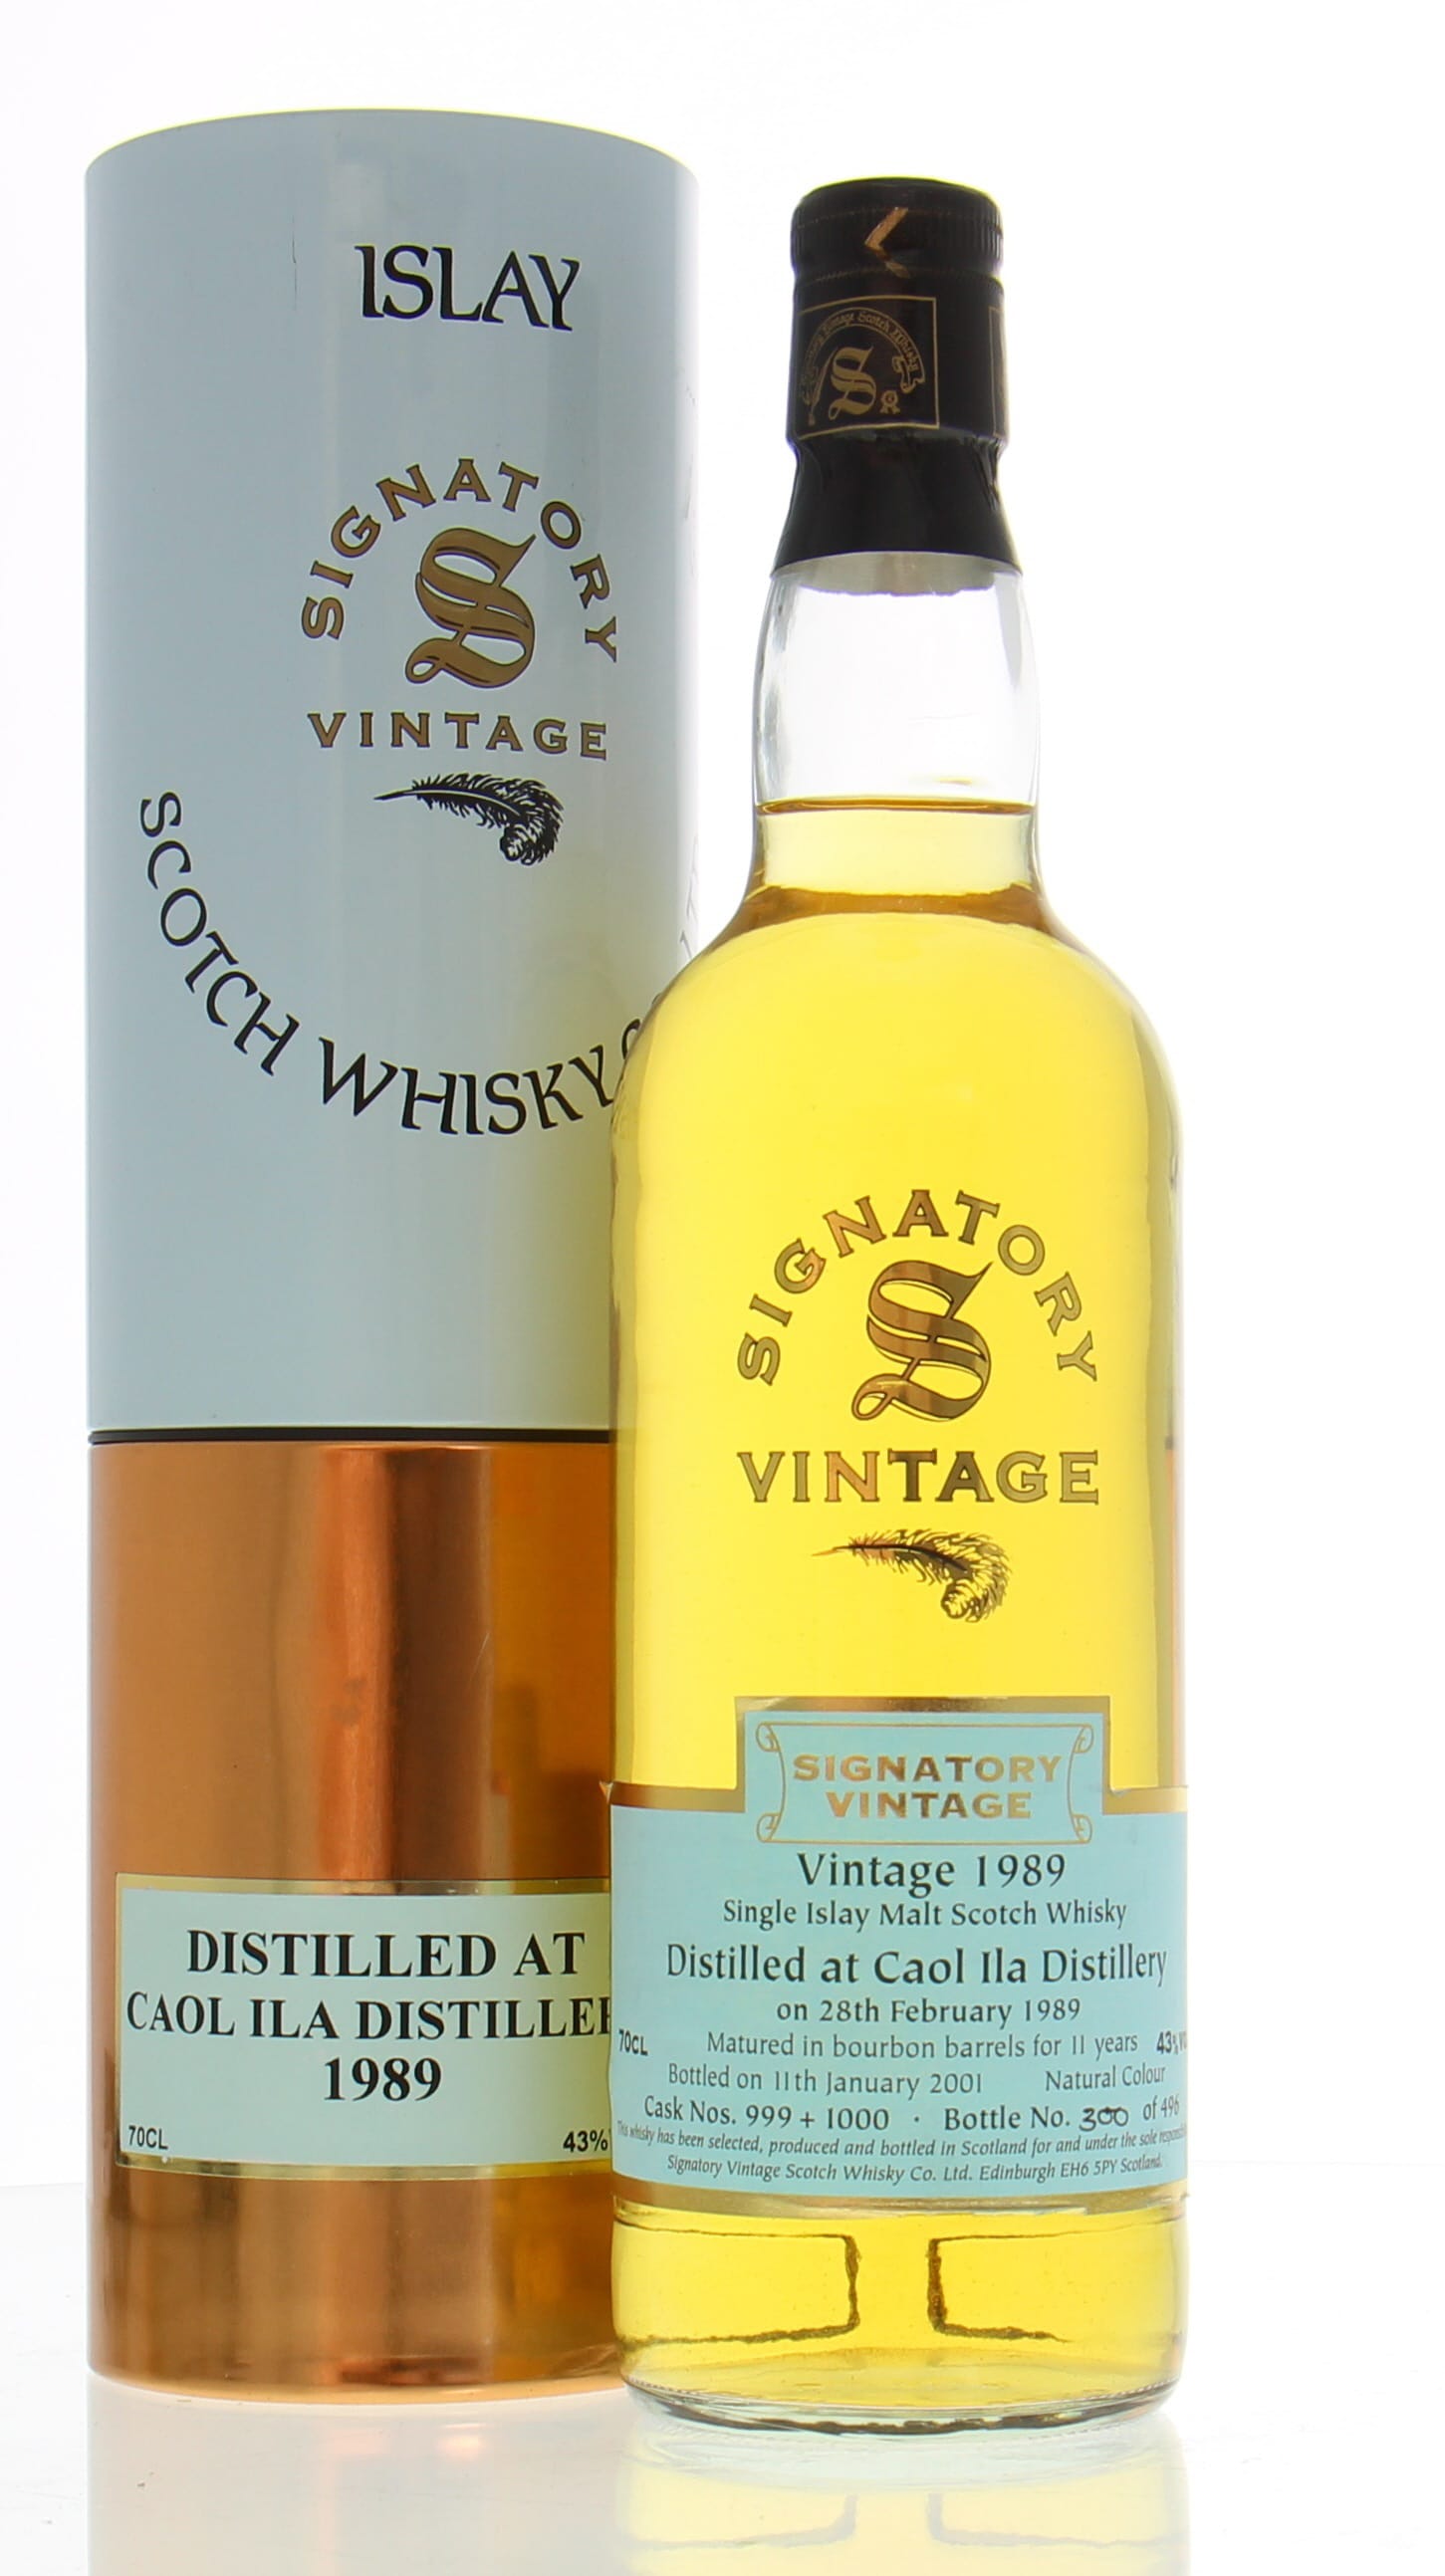 Caol Ila - 11 Years Old Signatory Vintage Cask:999+1000 43% 1989 In Original Container